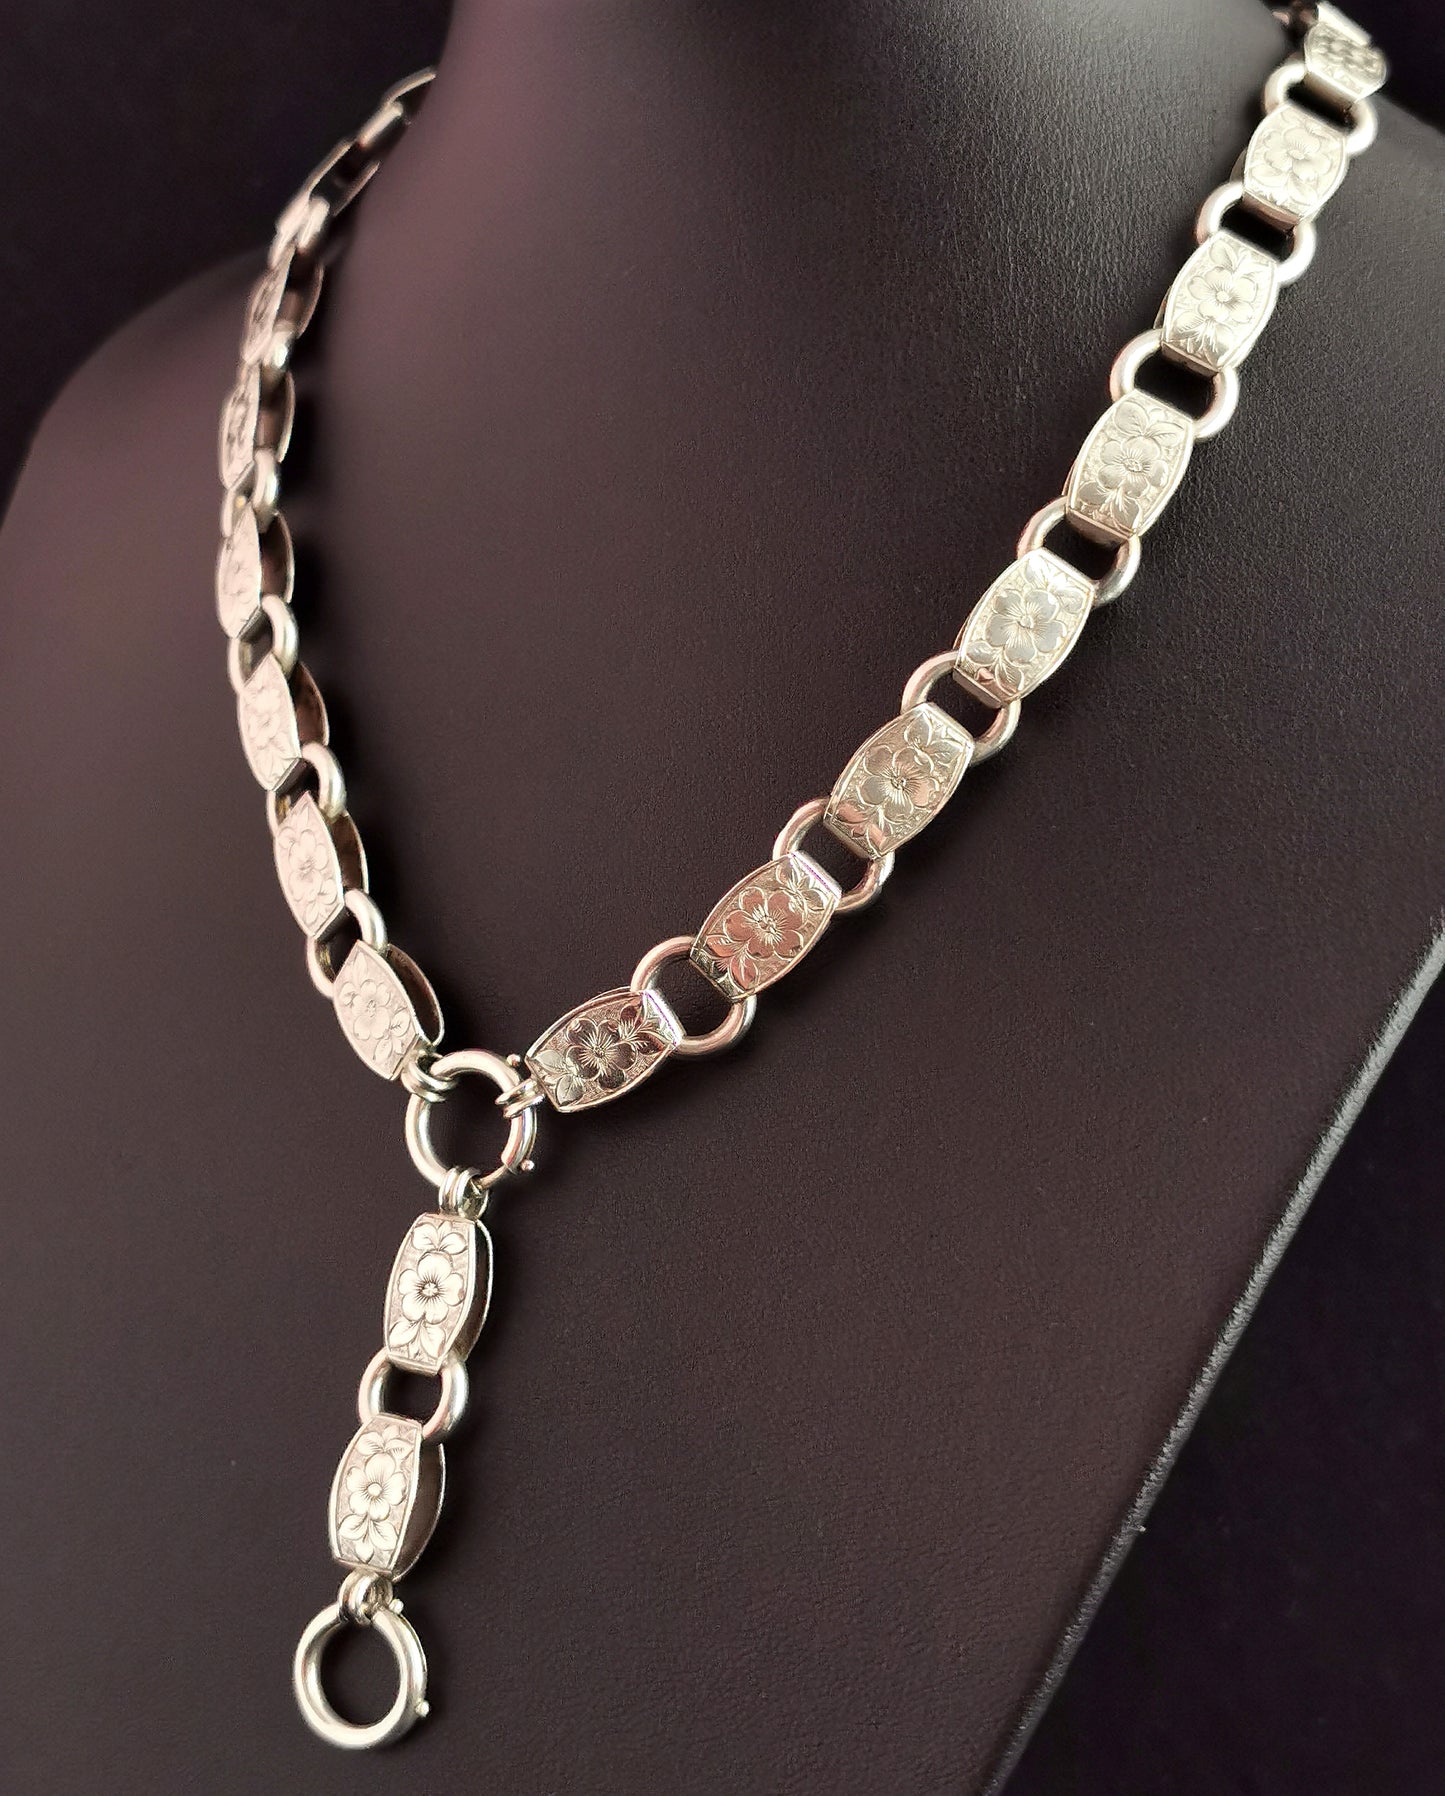 Antique Victorian silver collar necklace, Floral book chain, Day to night